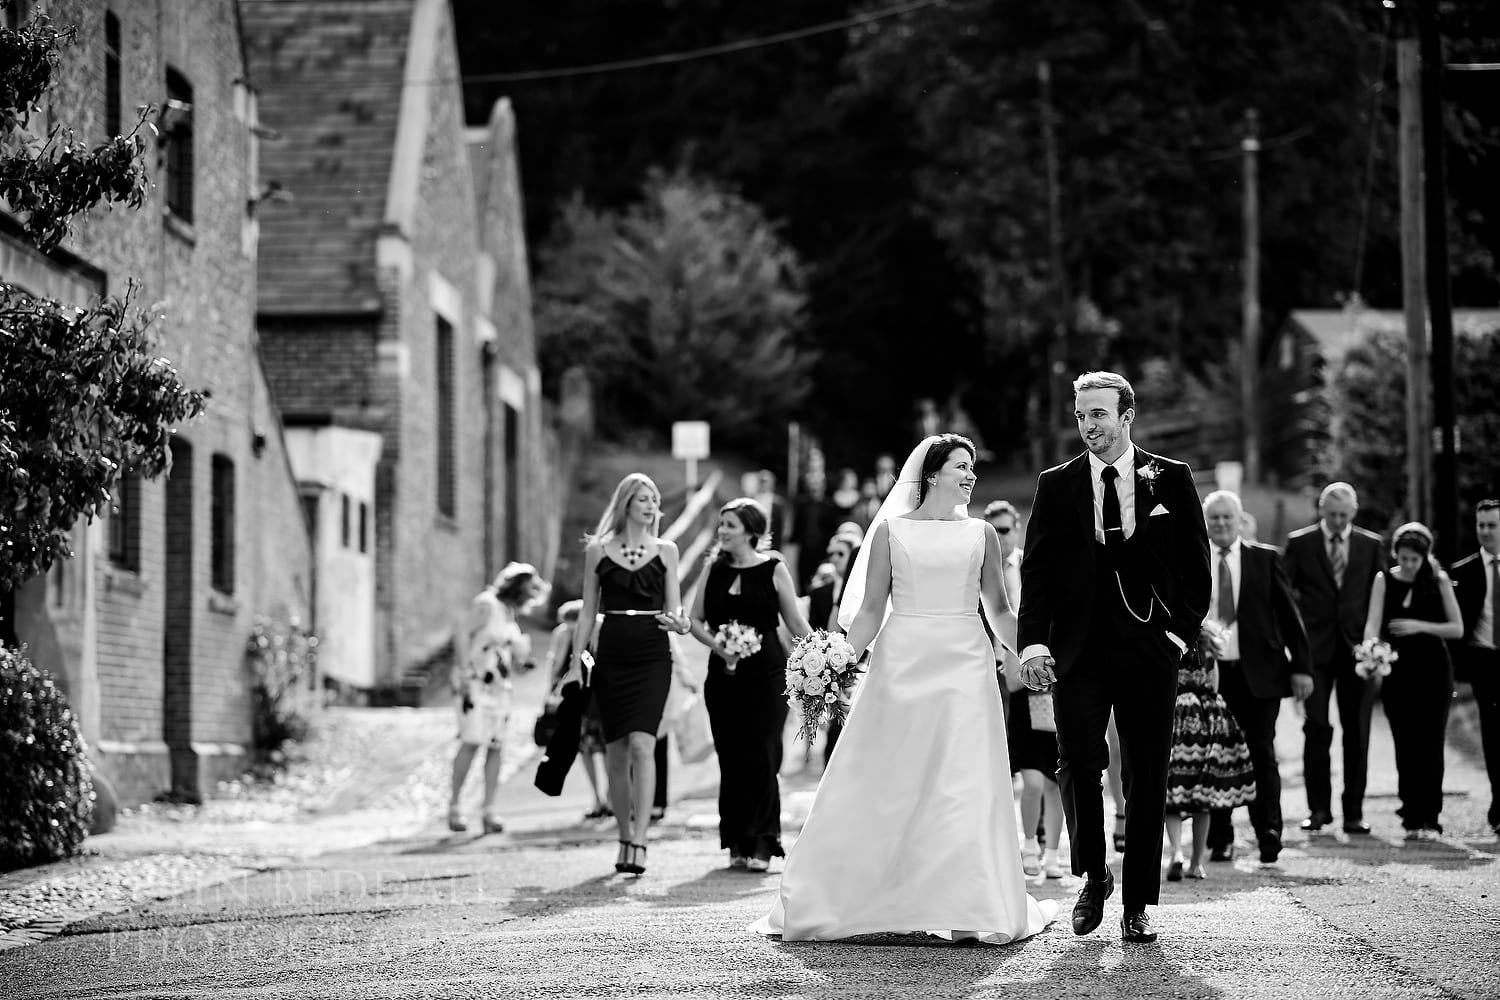 Brie and groom lead the guests to the reception at Folkington Manor